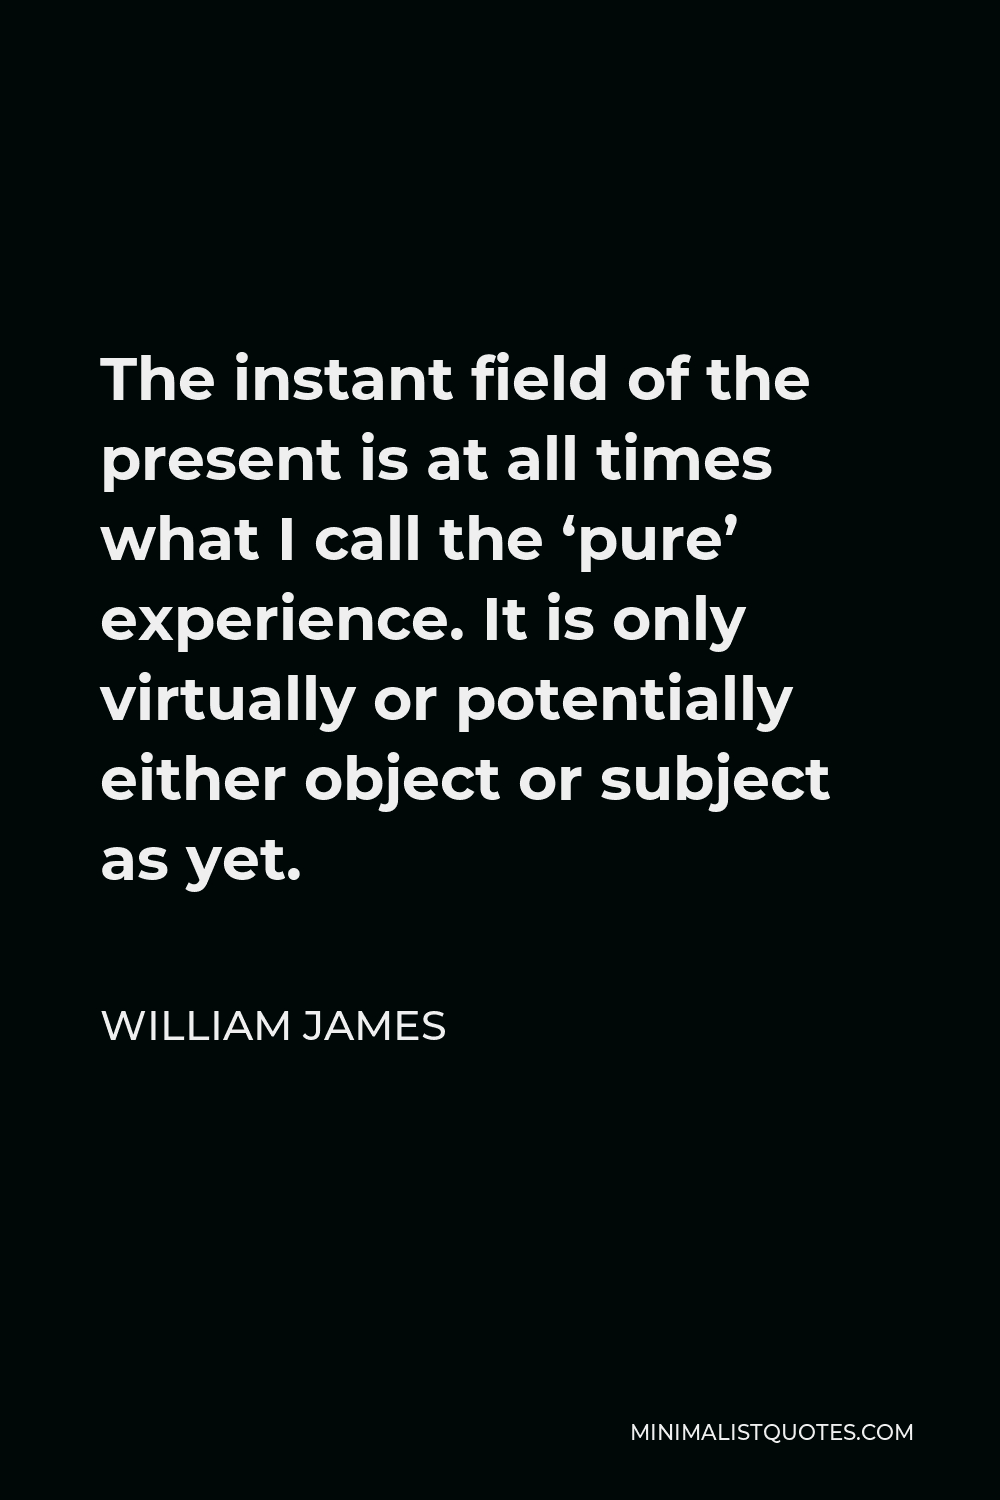 William James Quote - The instant field of the present is at all times what I call the ‘pure’ experience. It is only virtually or potentially either object or subject as yet.